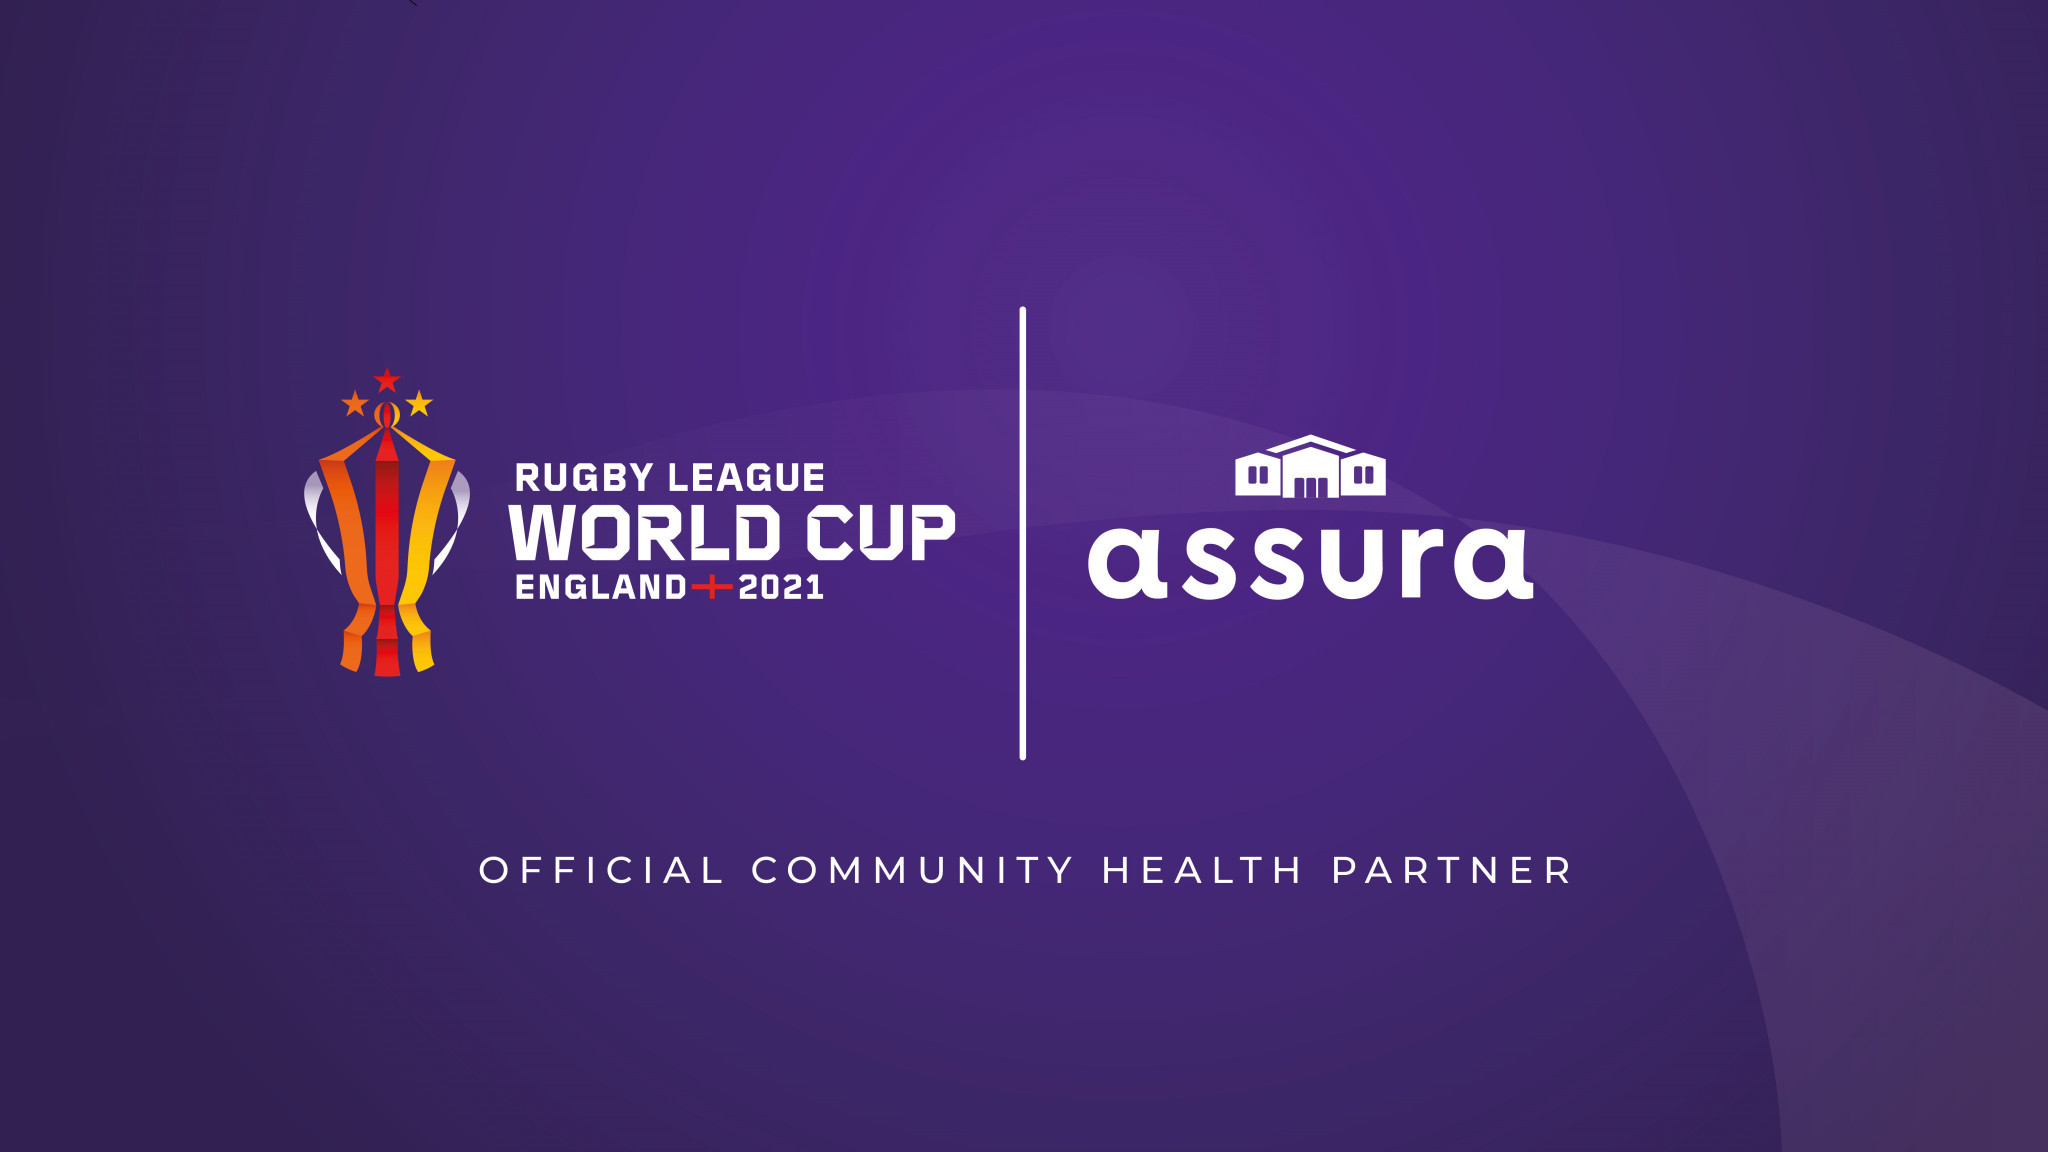 Assura has been named as the community health partner for the 2021 Rugby League World Cup in England ©RLWC2021